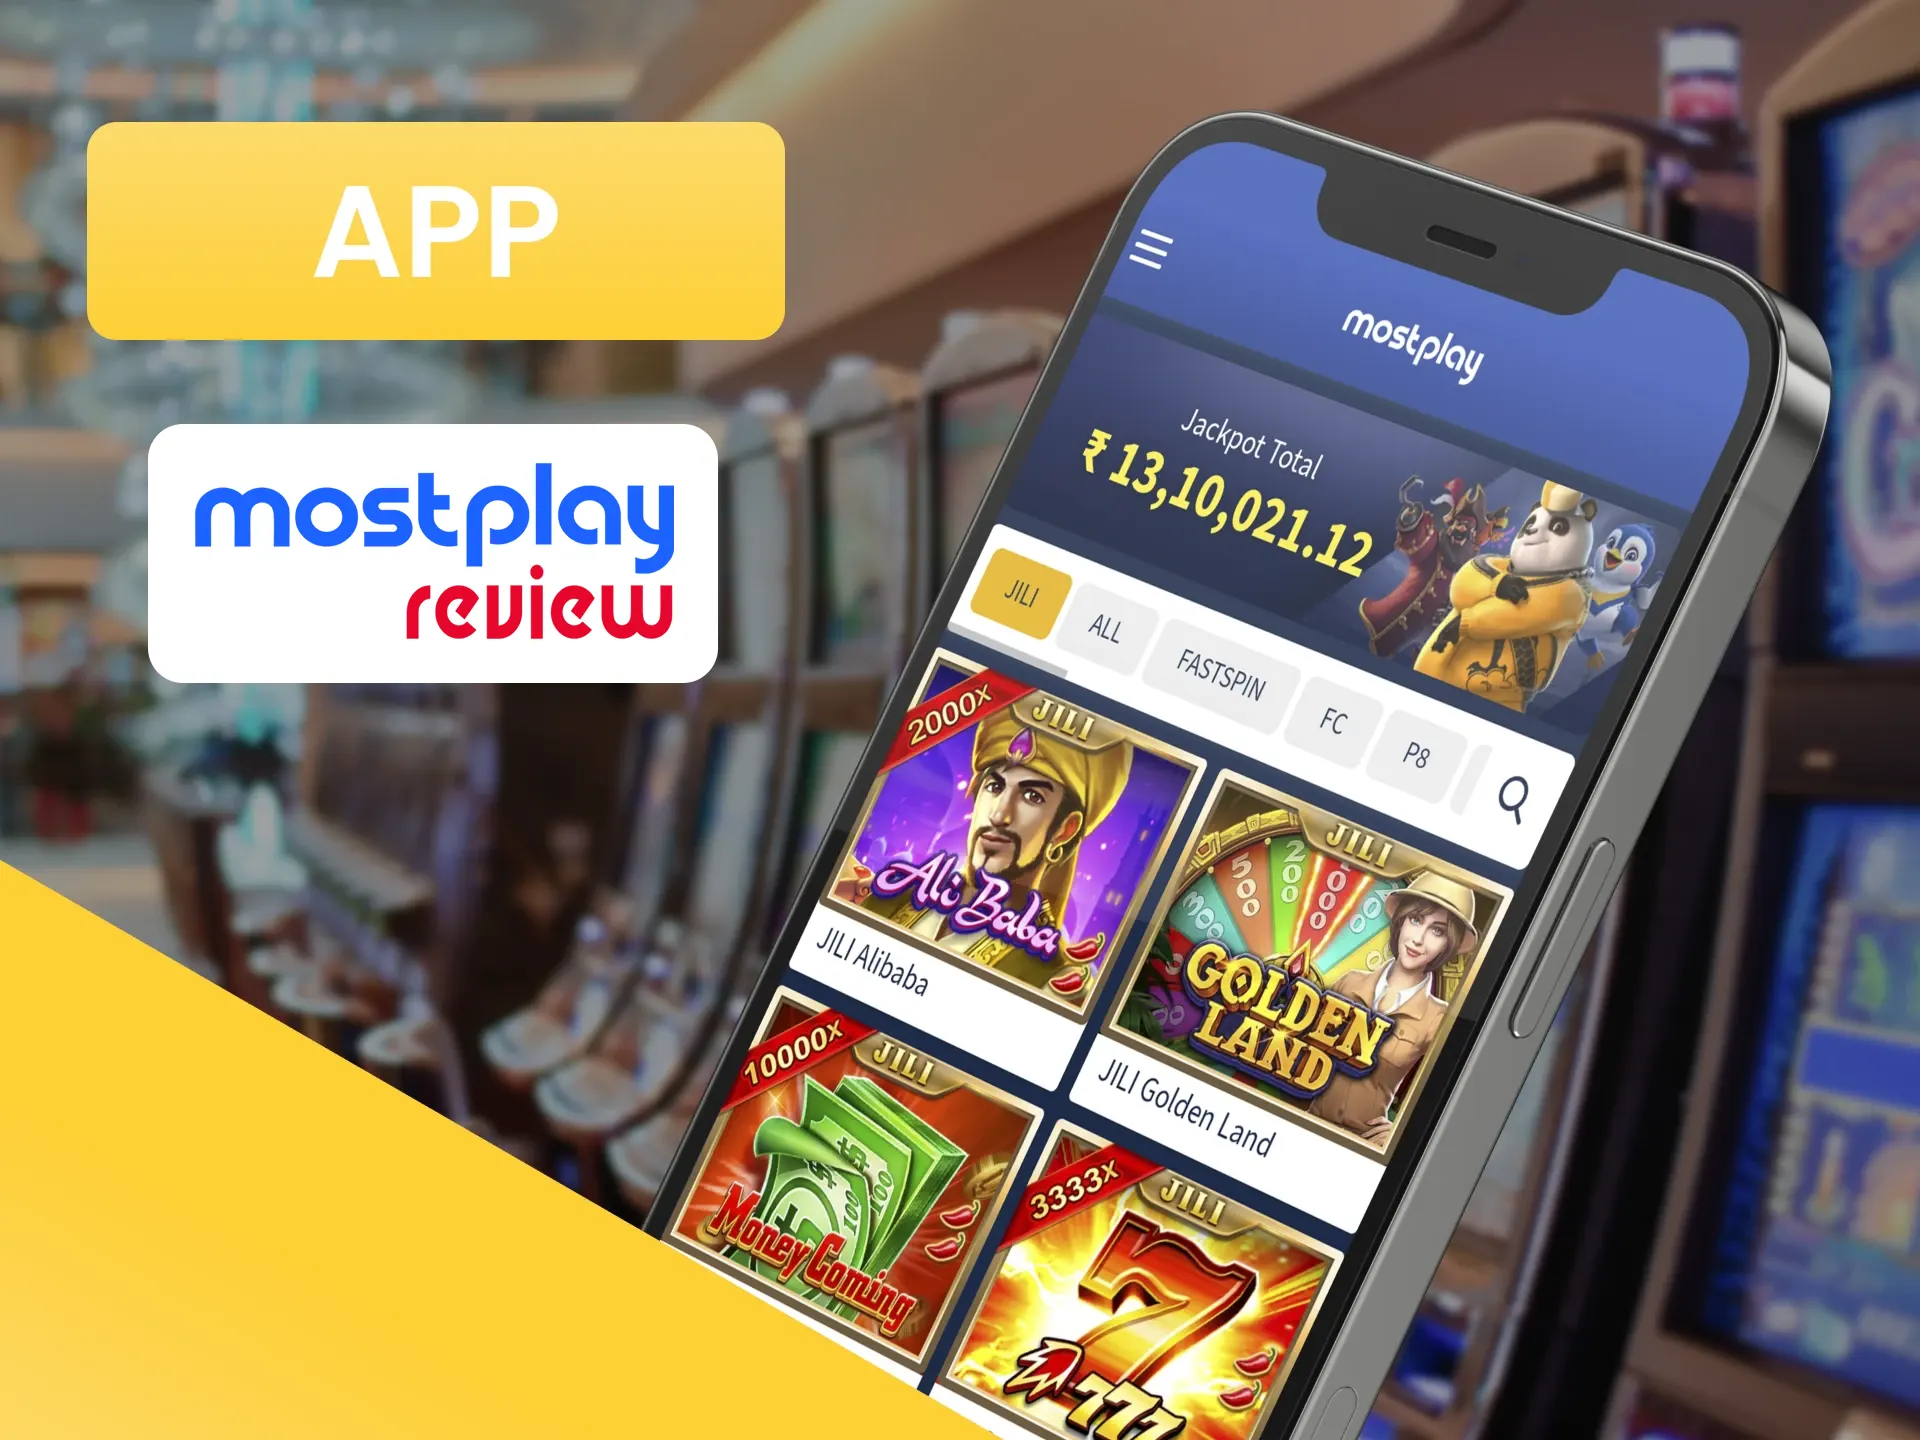 You can play Slots on Mostplay through your phone.